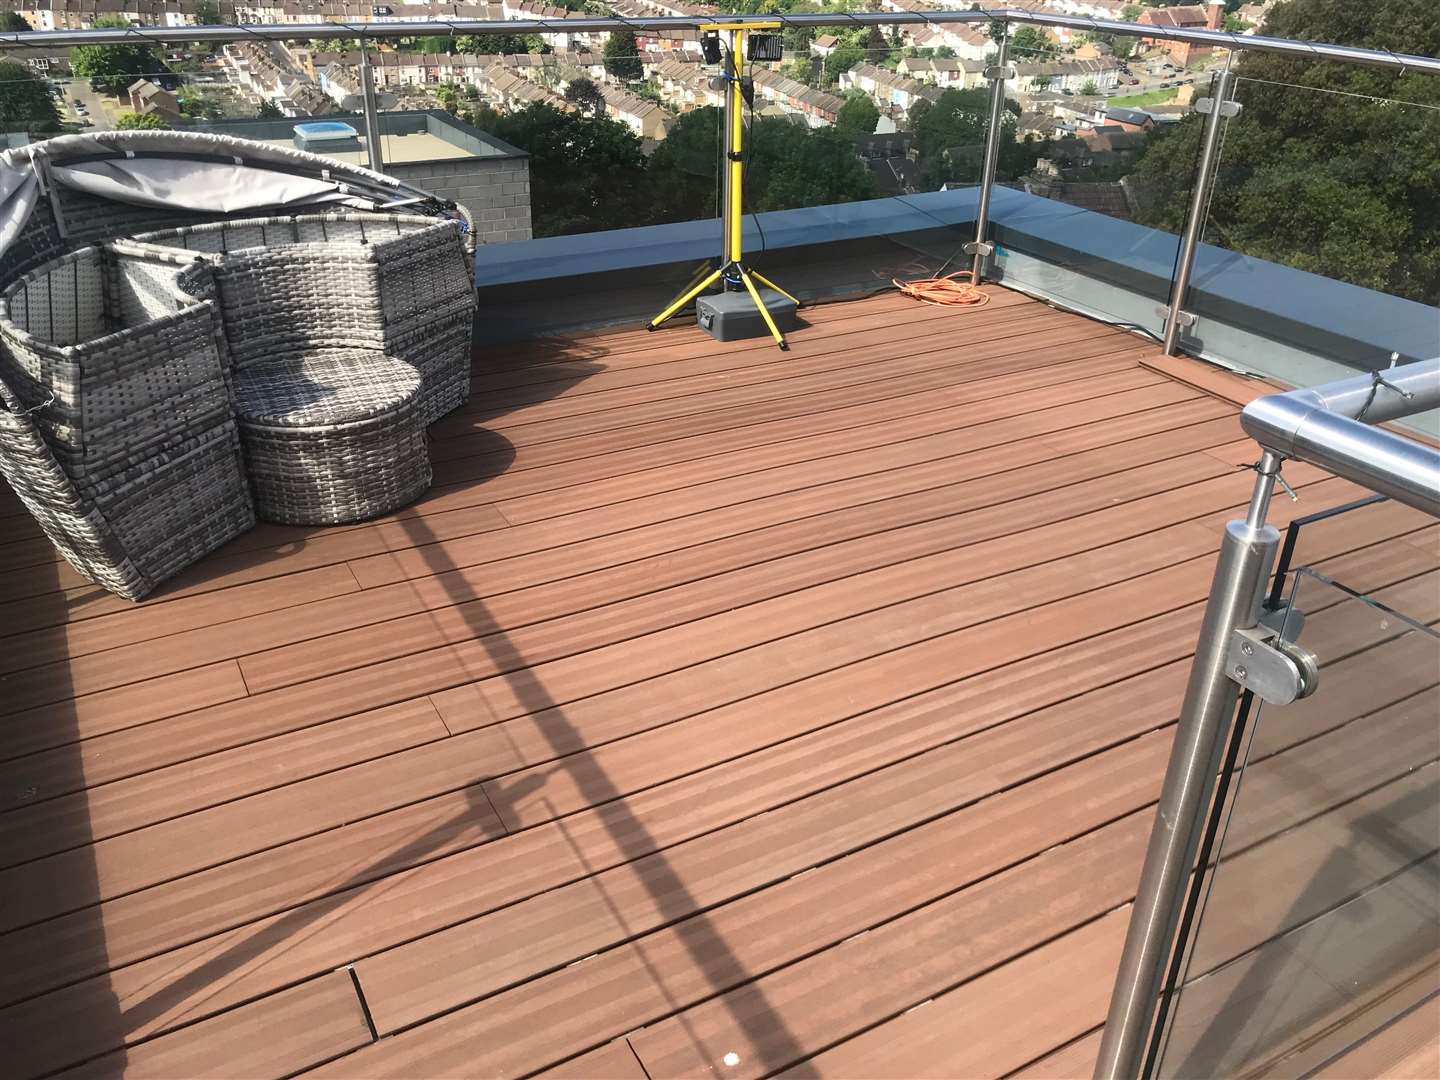 Mark and Lucia had to pay to replace decking and balustrades after they were removed